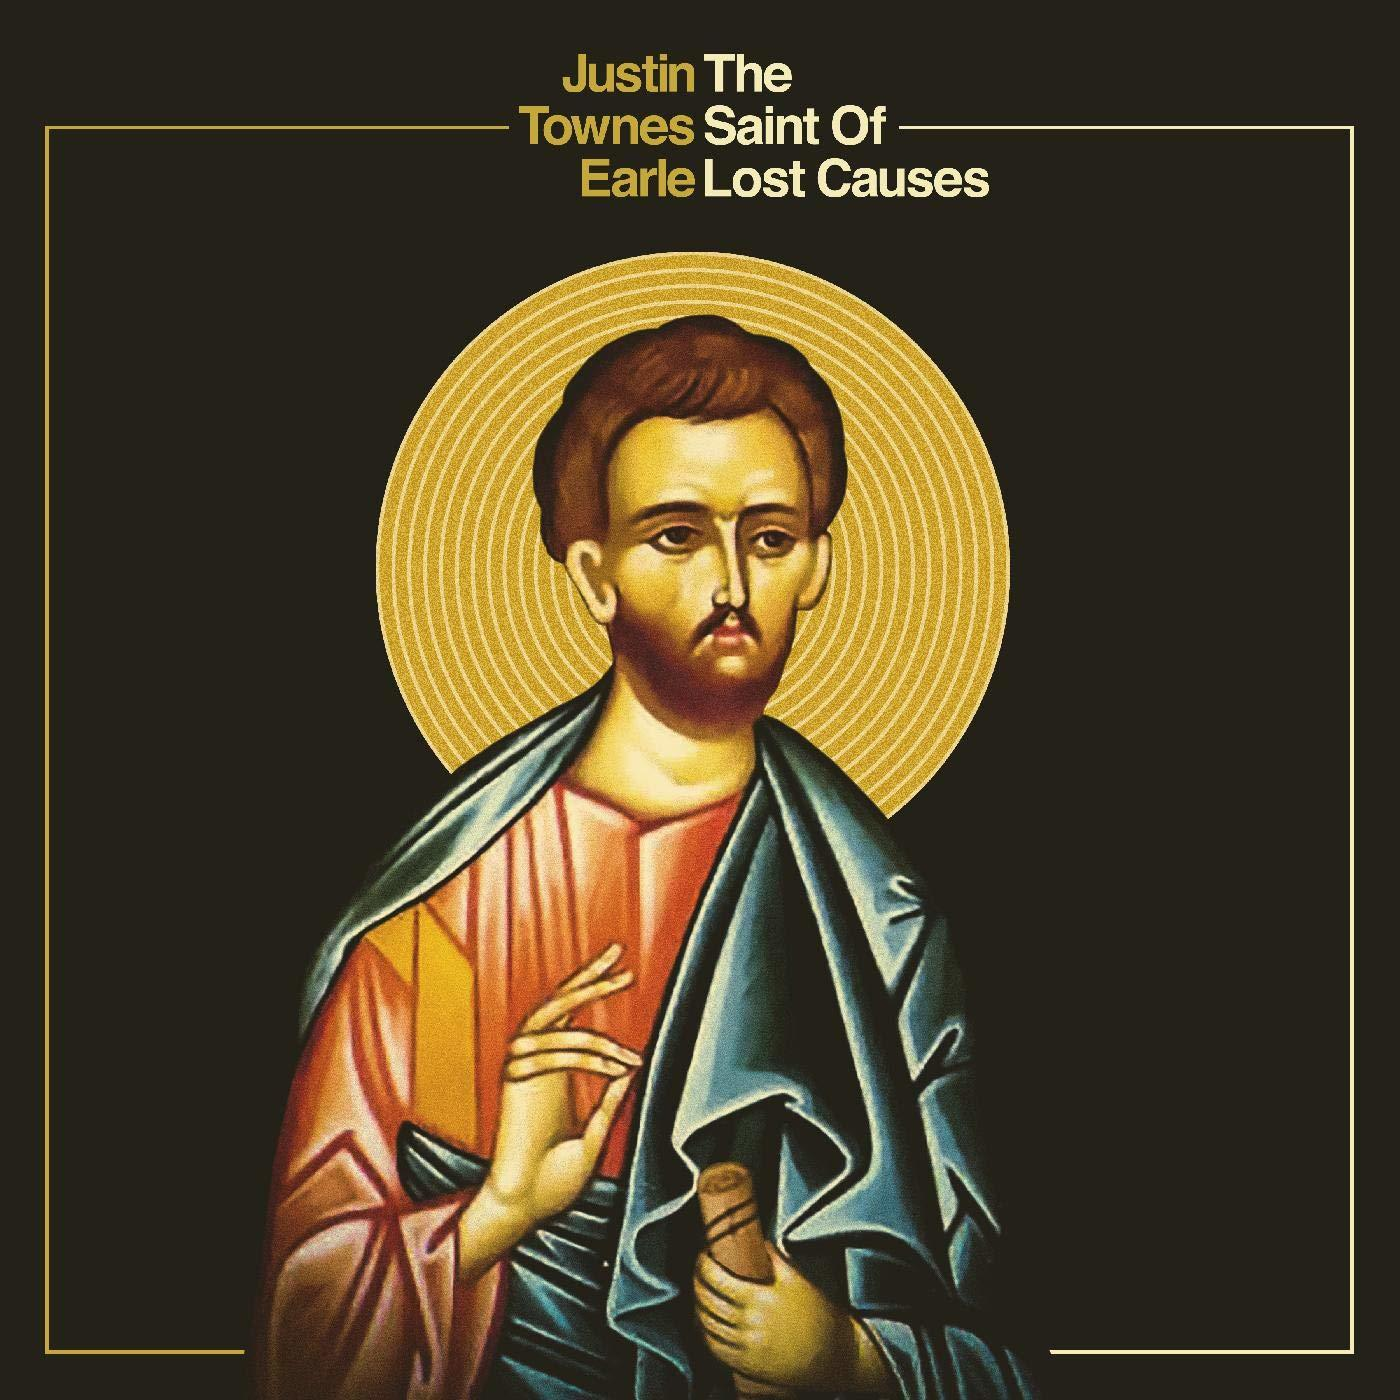 Justin Townes Earle - (CD) Saint Causes - Lost The Of